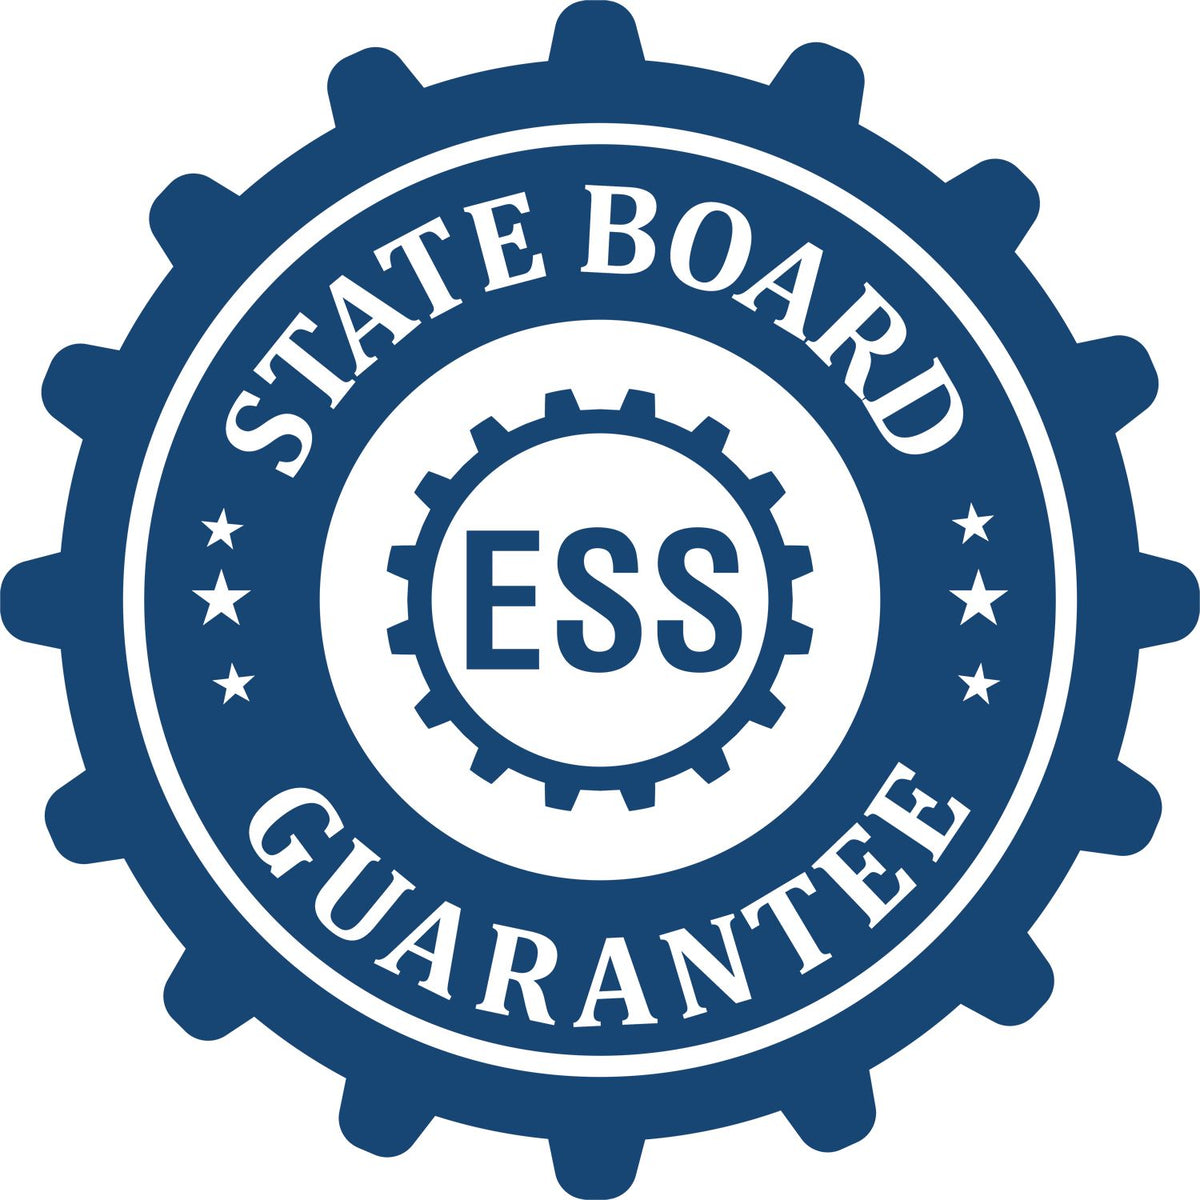 An emblem in a gear shape illustrating a state board guarantee for the Heavy-Duty Delaware Rectangular Notary Stamp product.